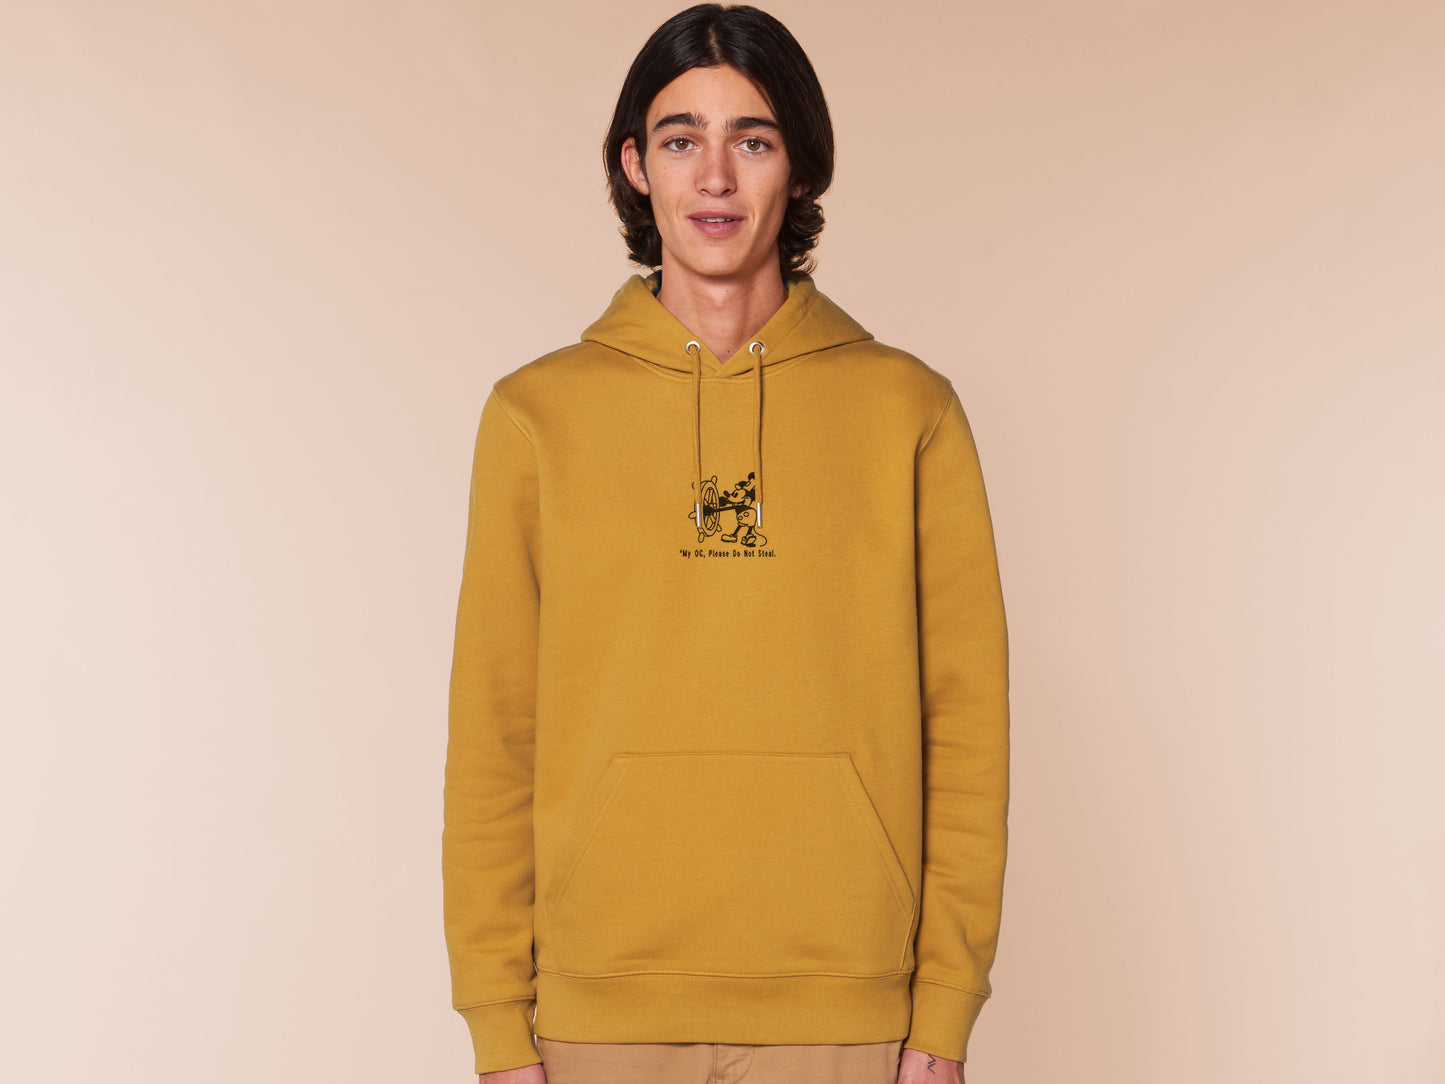 Man in long sleeved yellow fleece hoodie with an Embroidered Black Steamboat Willie Design From Disney's original Mickey Mouse Animation with the text *My OC, Please Don't Steal.